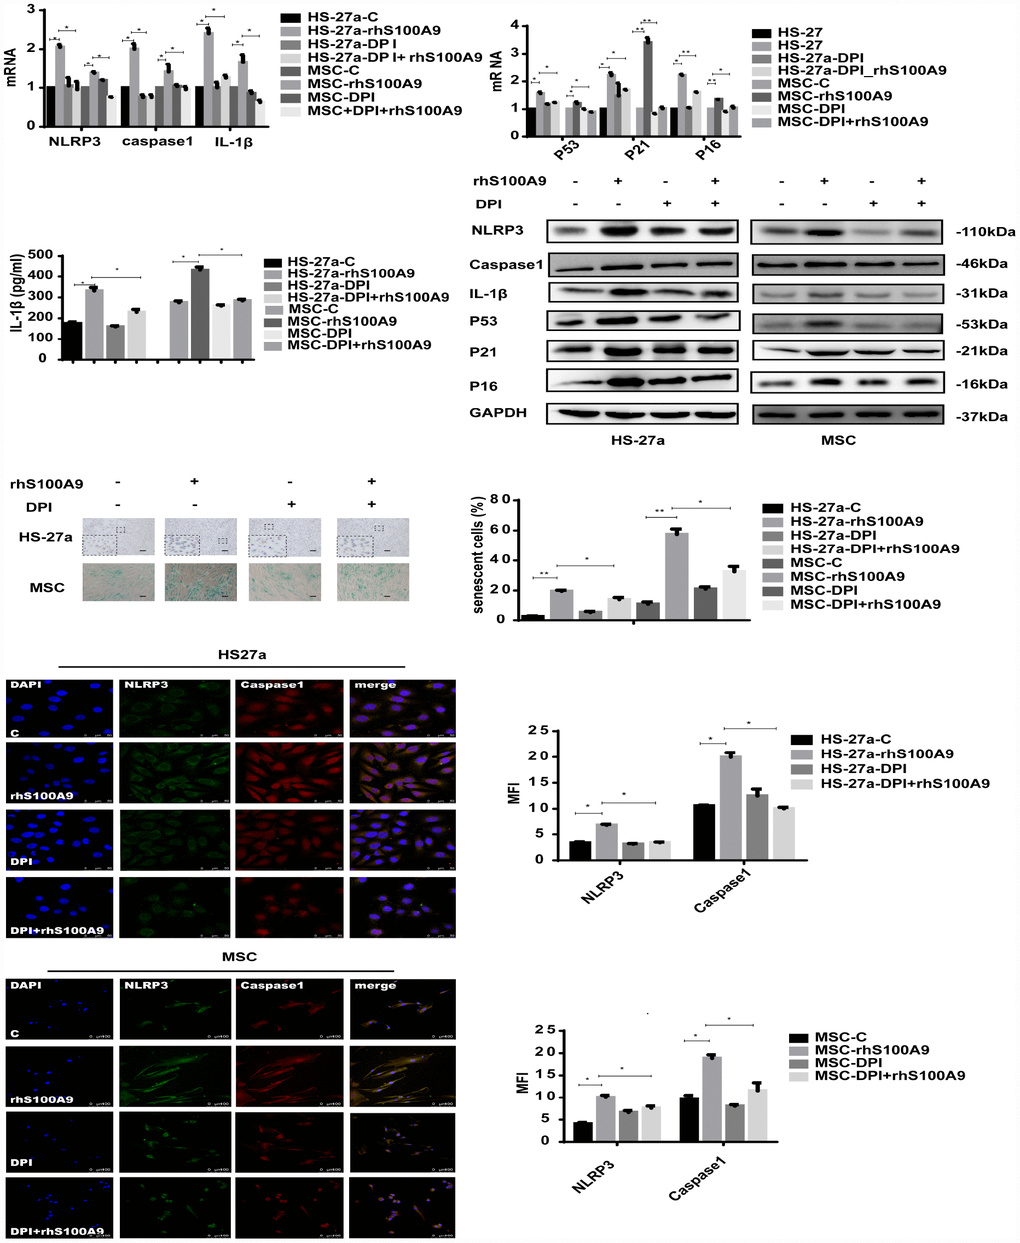 S100A9-induced cellular senescence, NLRP3 inflammasome formation, and IL-1β secretion require ROS. Cells were pretreated with DPI for 2 h and then treated with S100A9 for 72h. NLRP3, Caspase-1, IL-1β, p53, p21, and p16 expression was tested using qPCR and western blot. IL-1β secretion was measured utilizing ELISA. Senescent cells were counted and presented in graphs (40×magnification). Representative confocal fluorescence micrograph of Caspase-1 and NLRP3 expression (scale bars: HS-27a 50 μm and MSC 100 μm). Data are expressed as mean ± SD from three experiments. *P